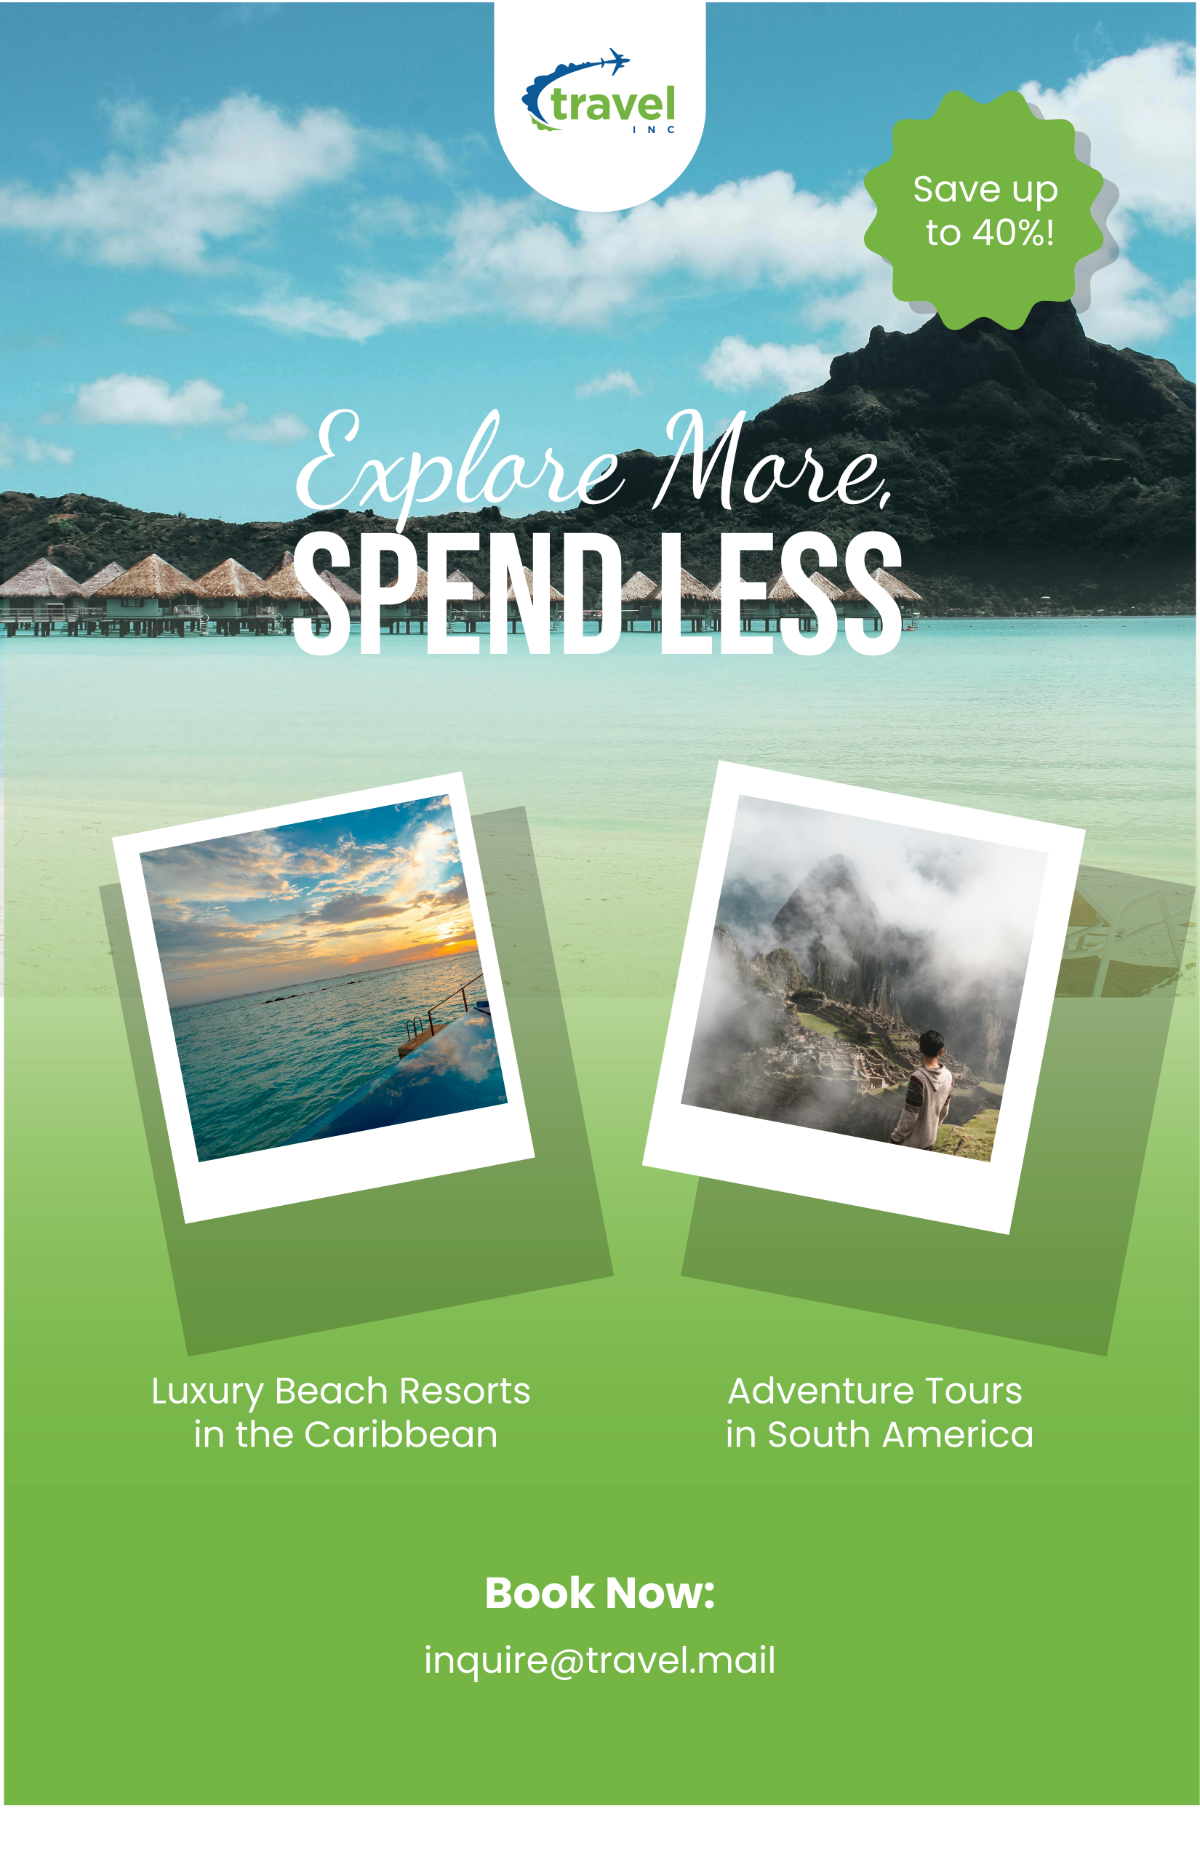 Travel Agency Announcement Poster Template